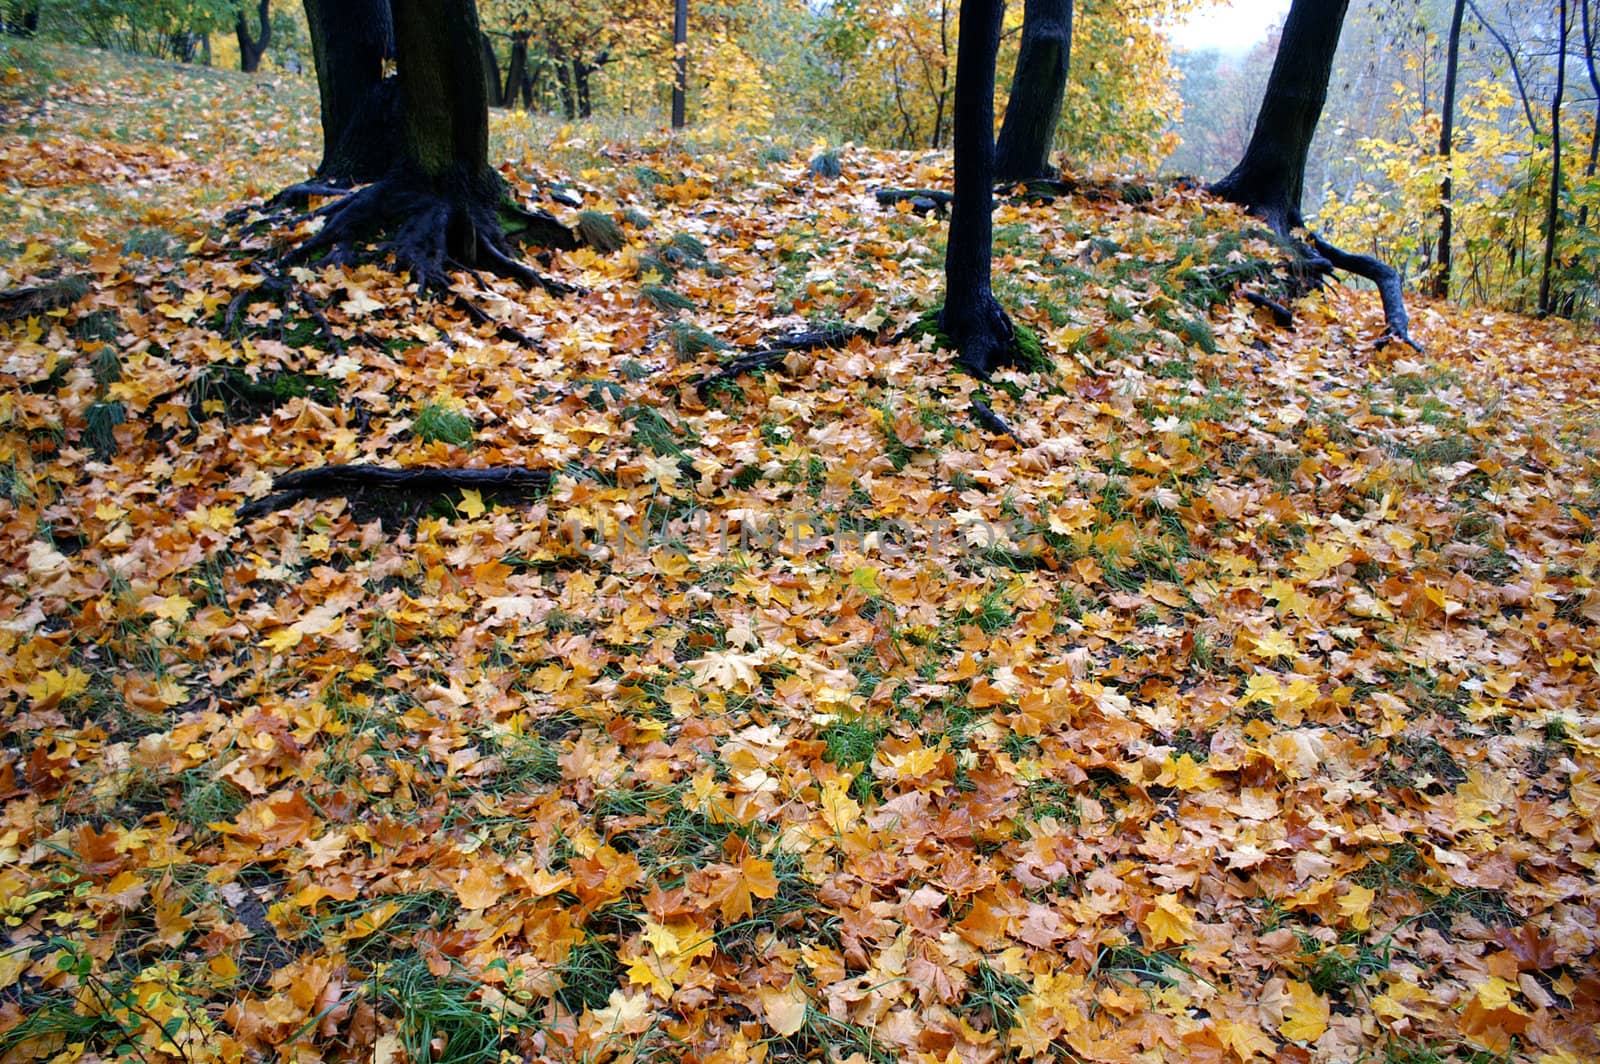 Autumn Leaves on Ground in Poland